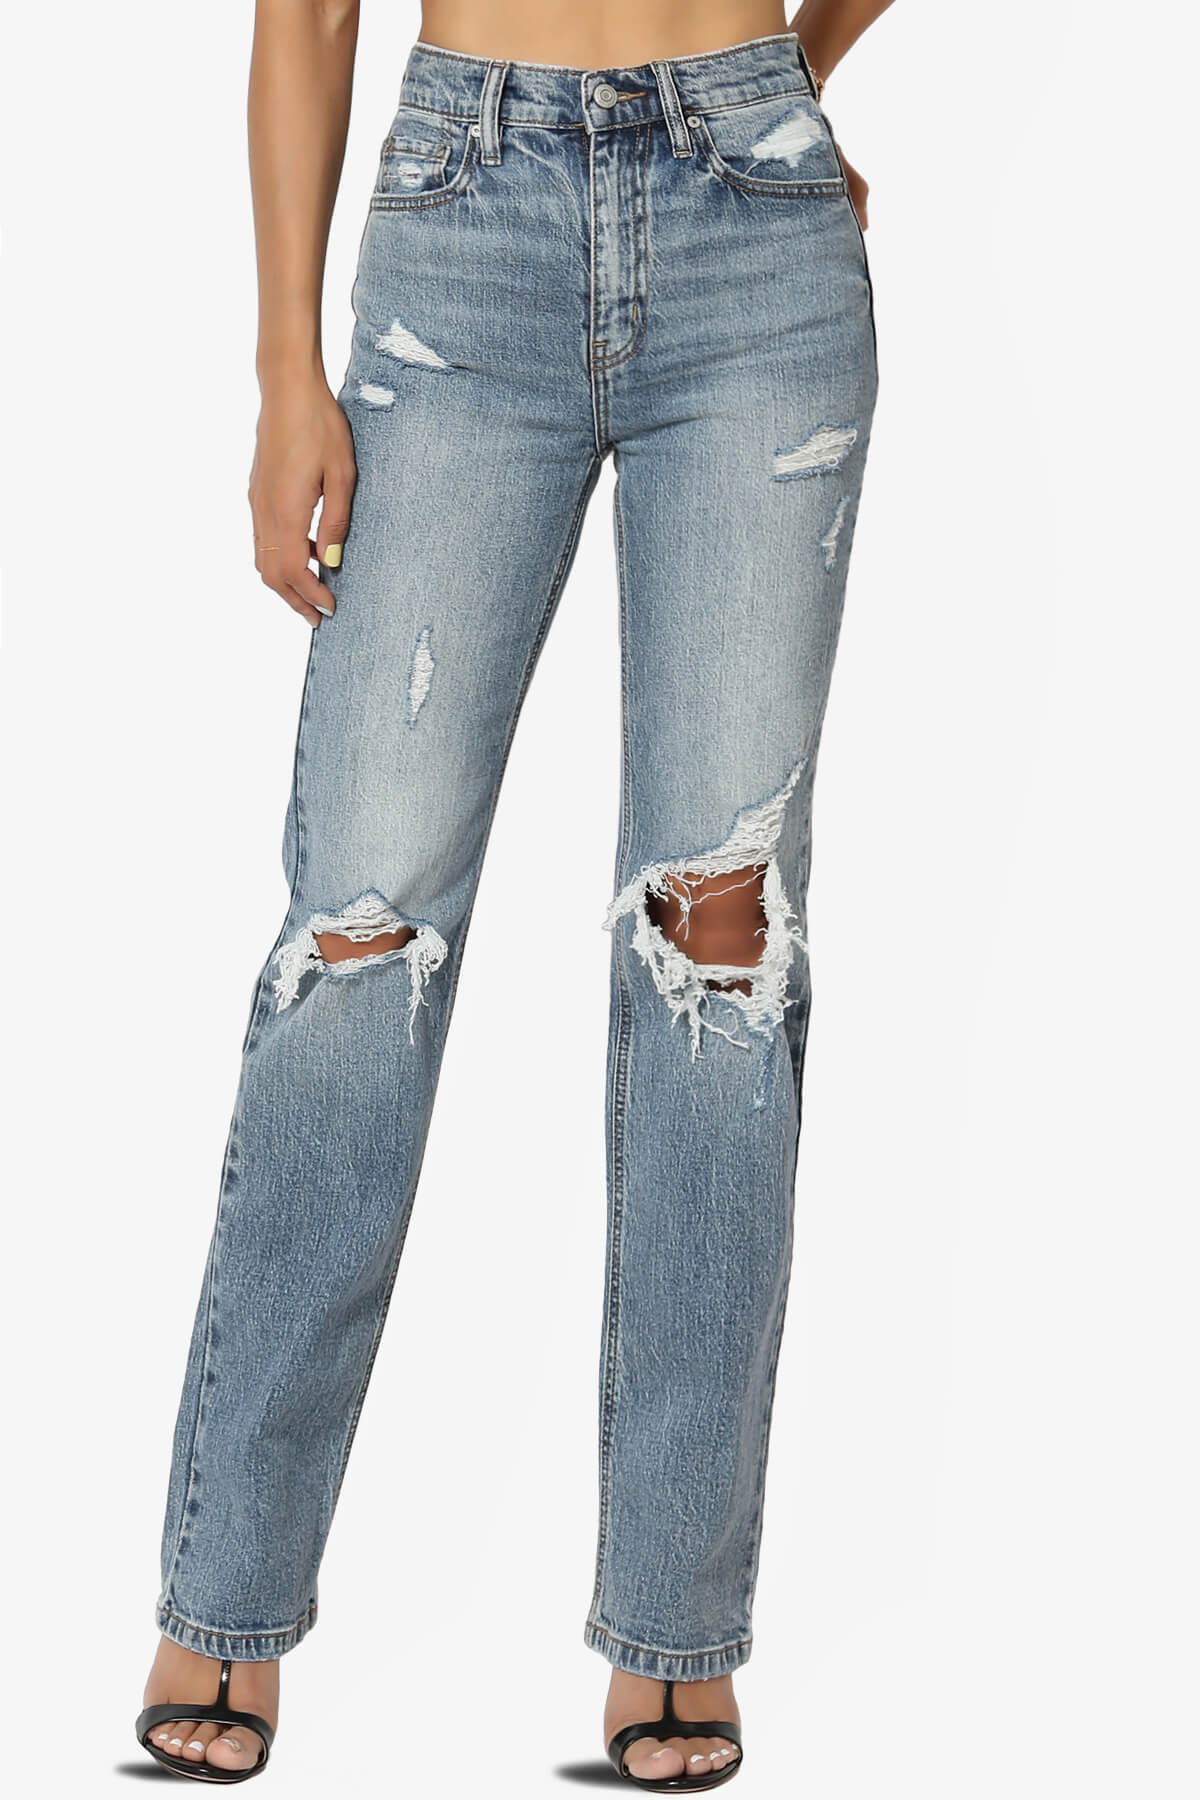 A woman wearing distressed dad jeans